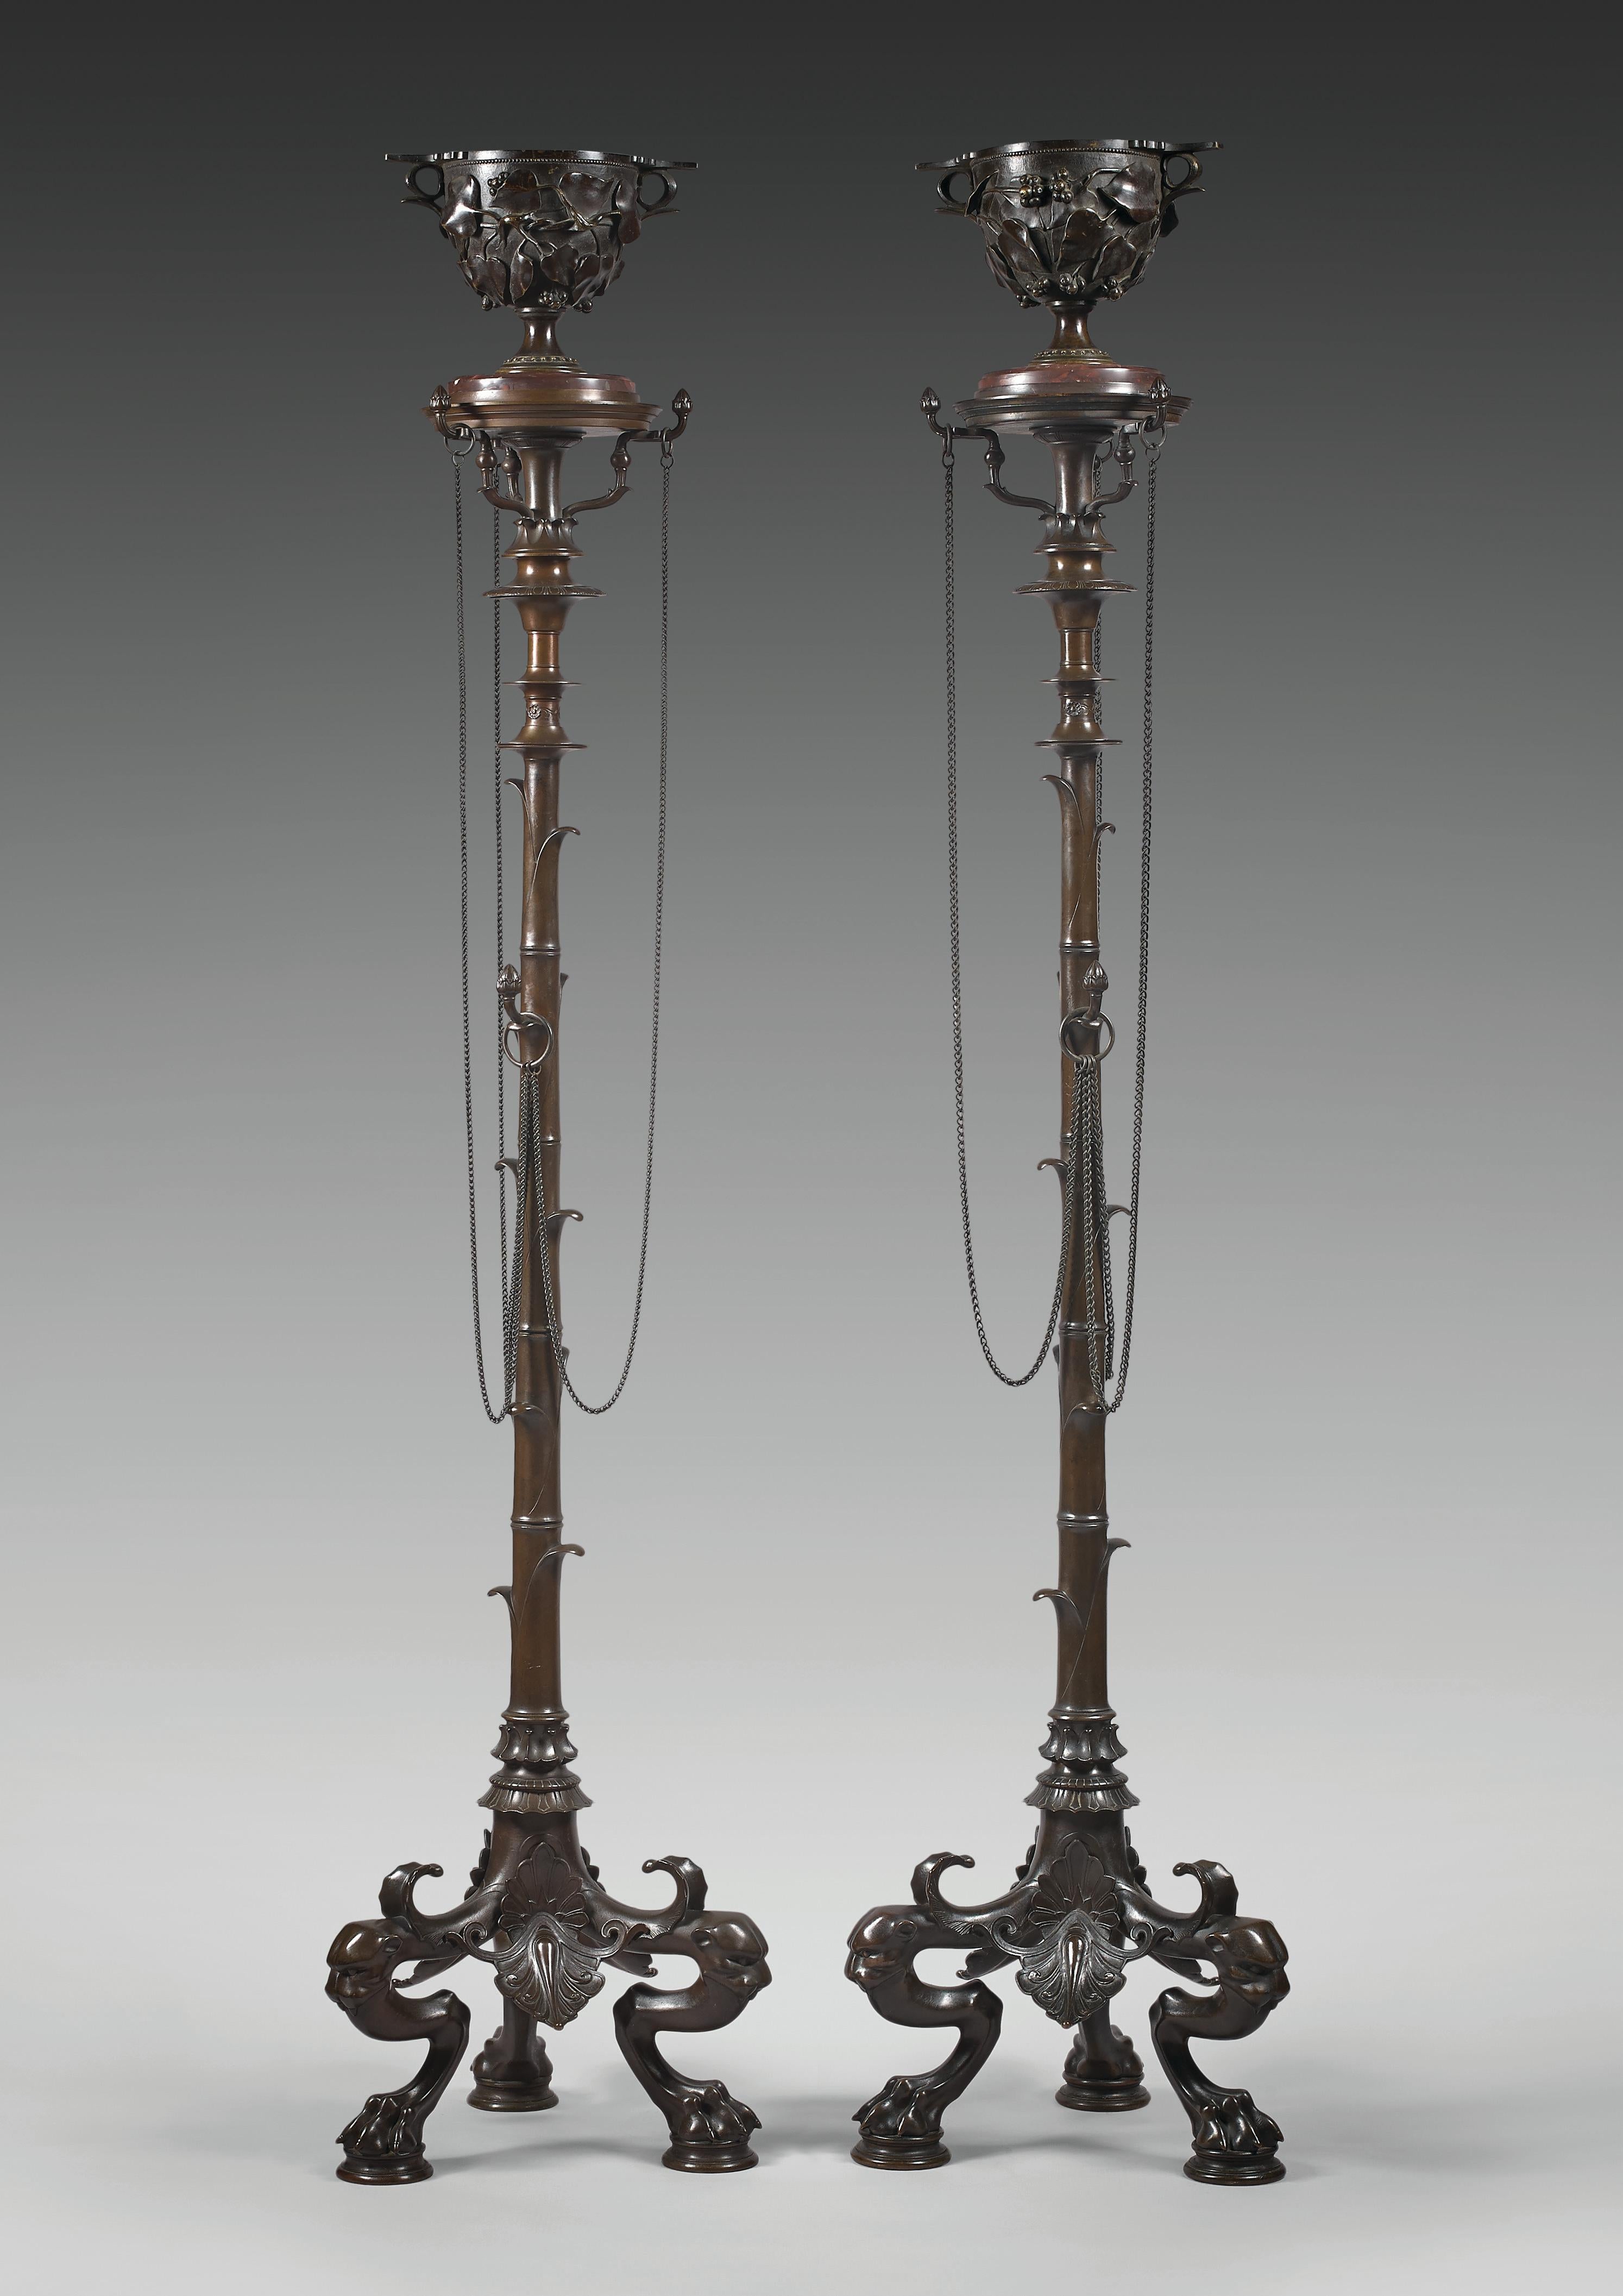 A similar model presented at the 1855 Paris Universal Exhibition

Total height : 154 cm (60 5/8 in.) ; Width : 33 x 33 cm (13 x 13 in.)
Cup : height 17 cm (6 ¾ in.)

Beautiful pair of bronze stands also named Bamboo candelabra. Each rests on